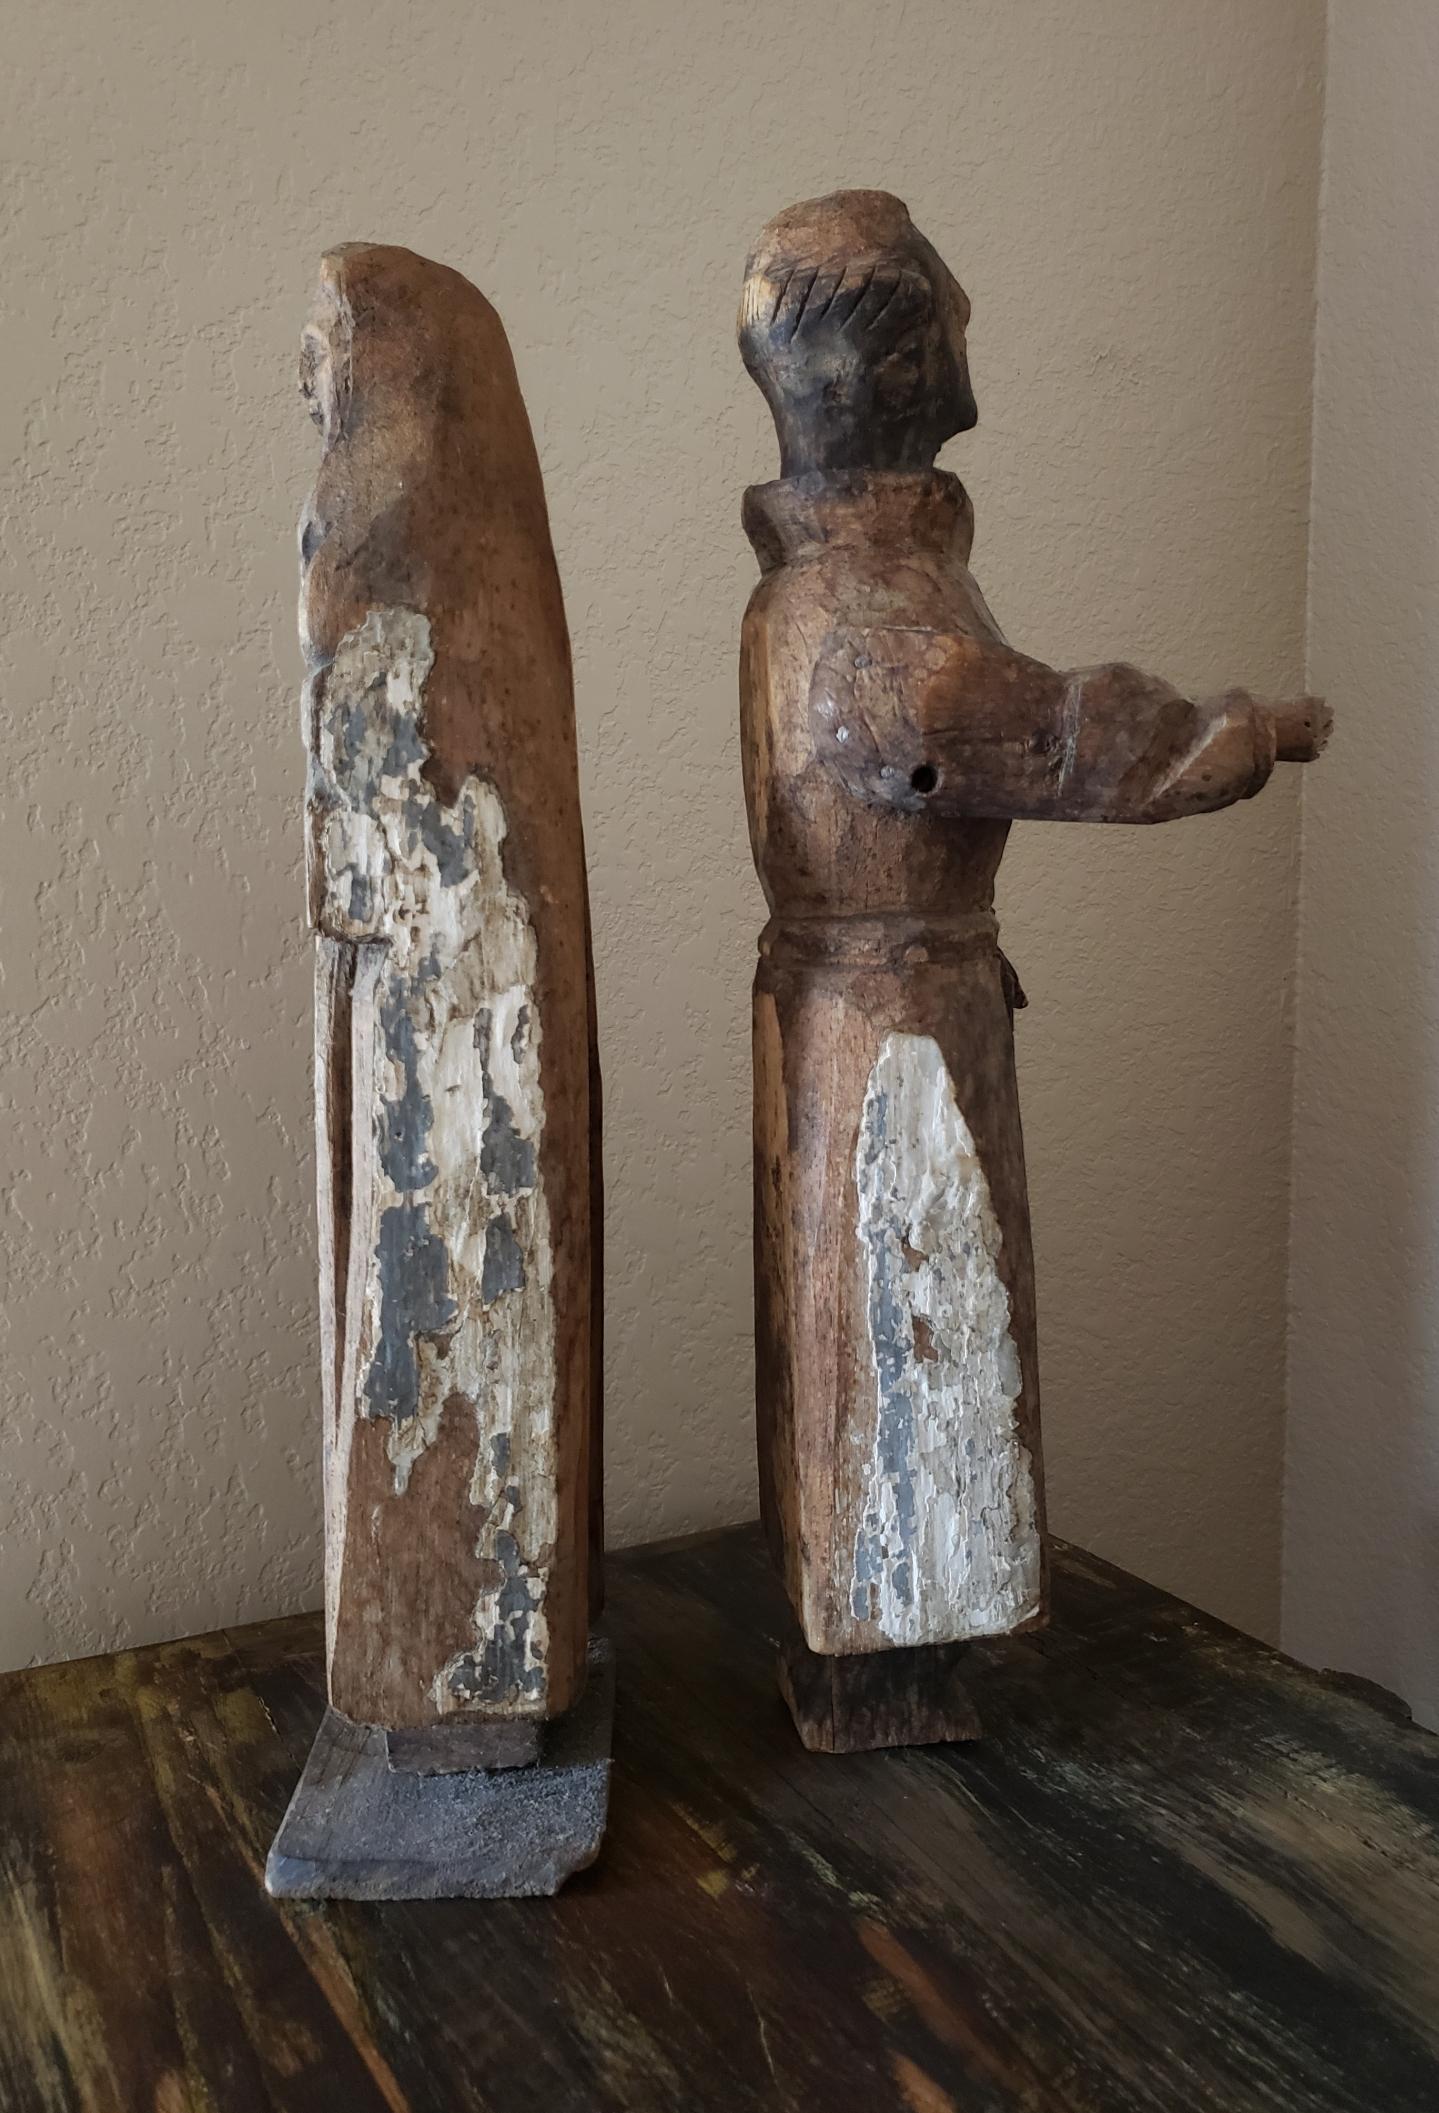 Pair of Large Rustic Religious Stripped Wood Antique Santo Altar Figures In Good Condition For Sale In Forney, TX